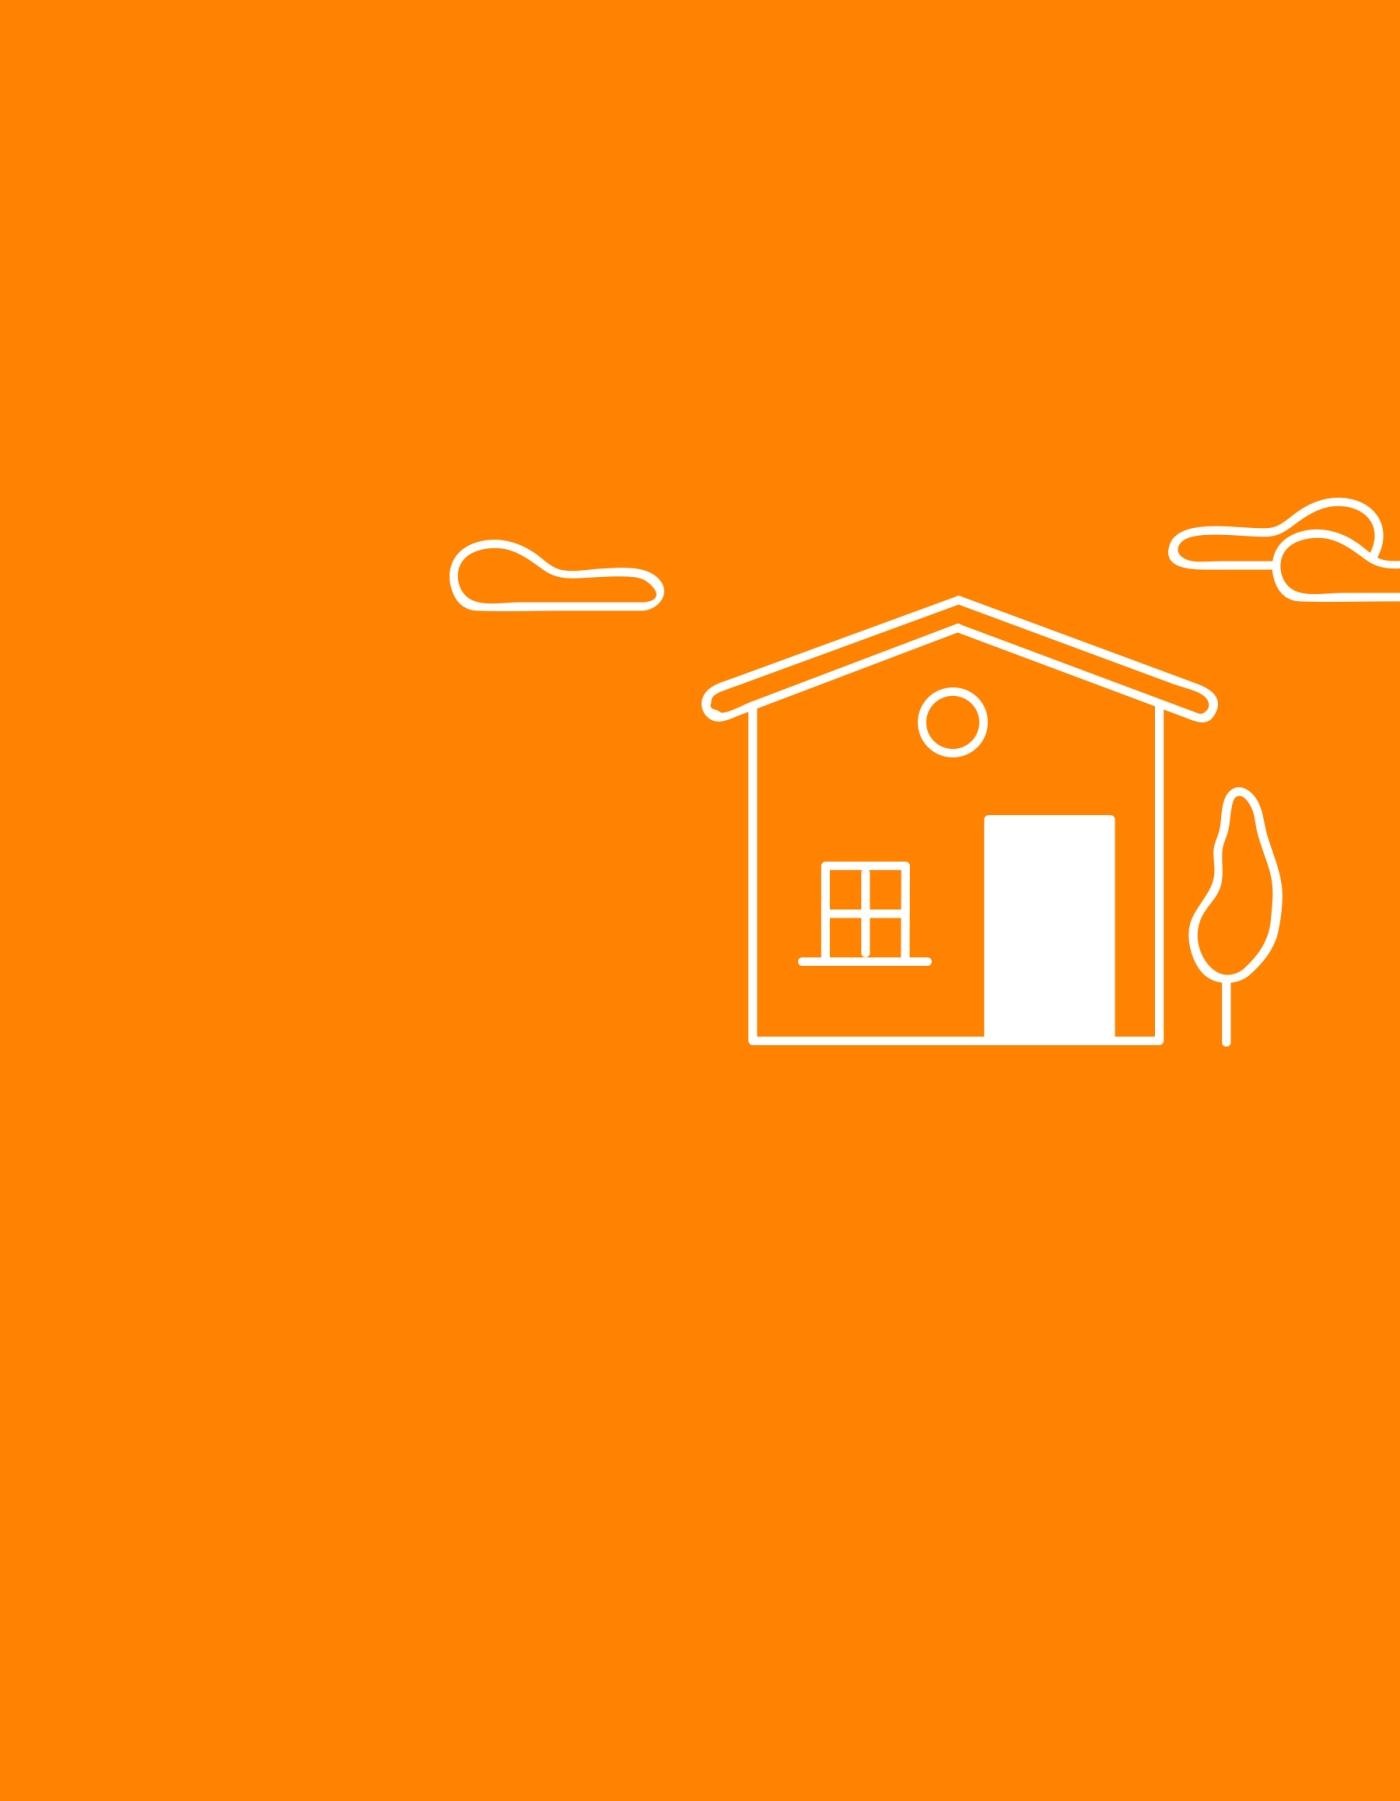 orange background with house and clouds illustration